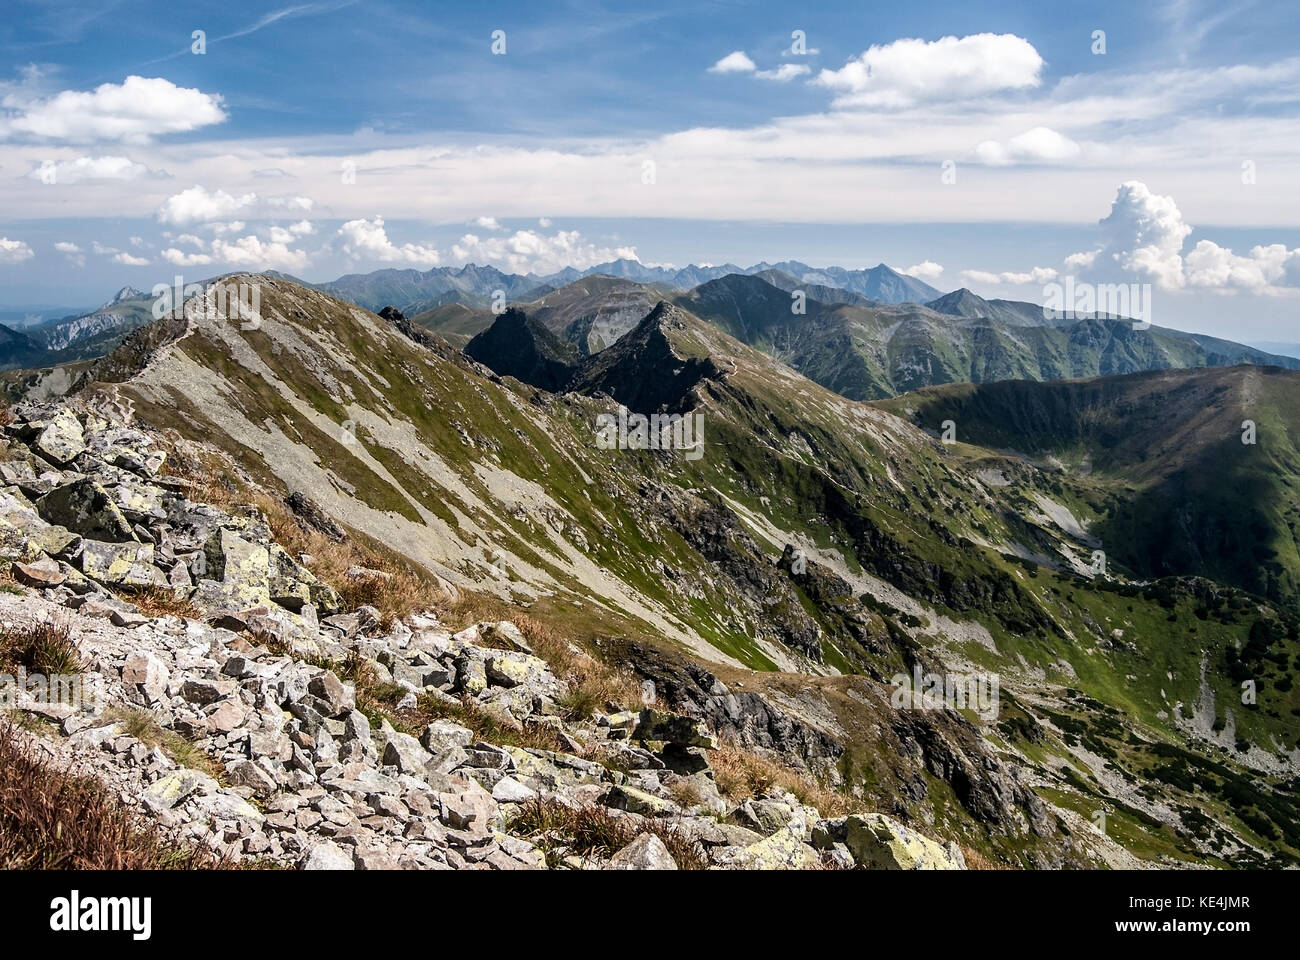 spectacular panorama of Tatras mountain range from Banikov peak in Rohace mountain group in Slovakia during nice day with blue sky and clouds Stock Photo